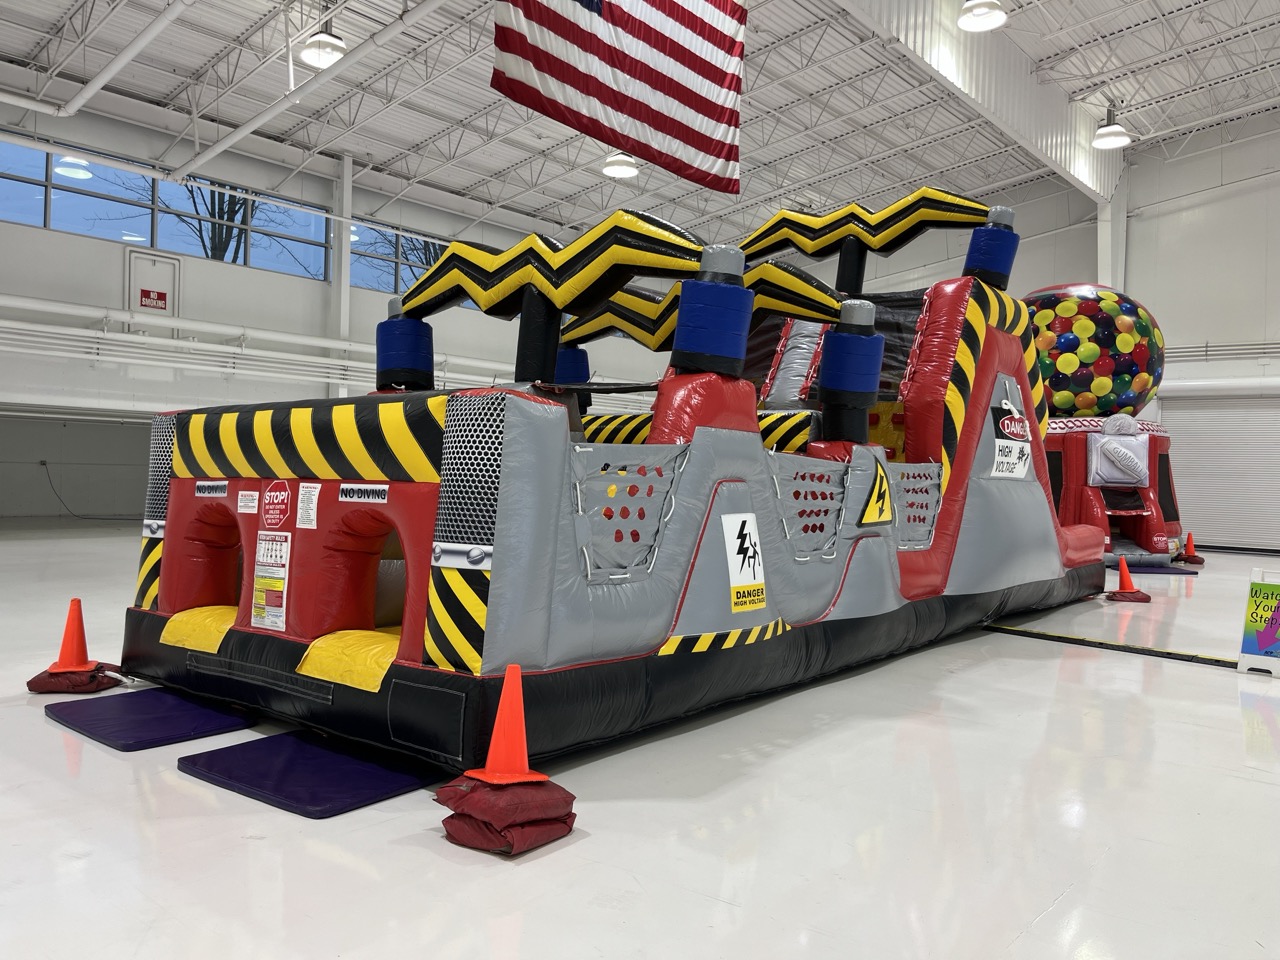 Obstacle course rentals in Michigan